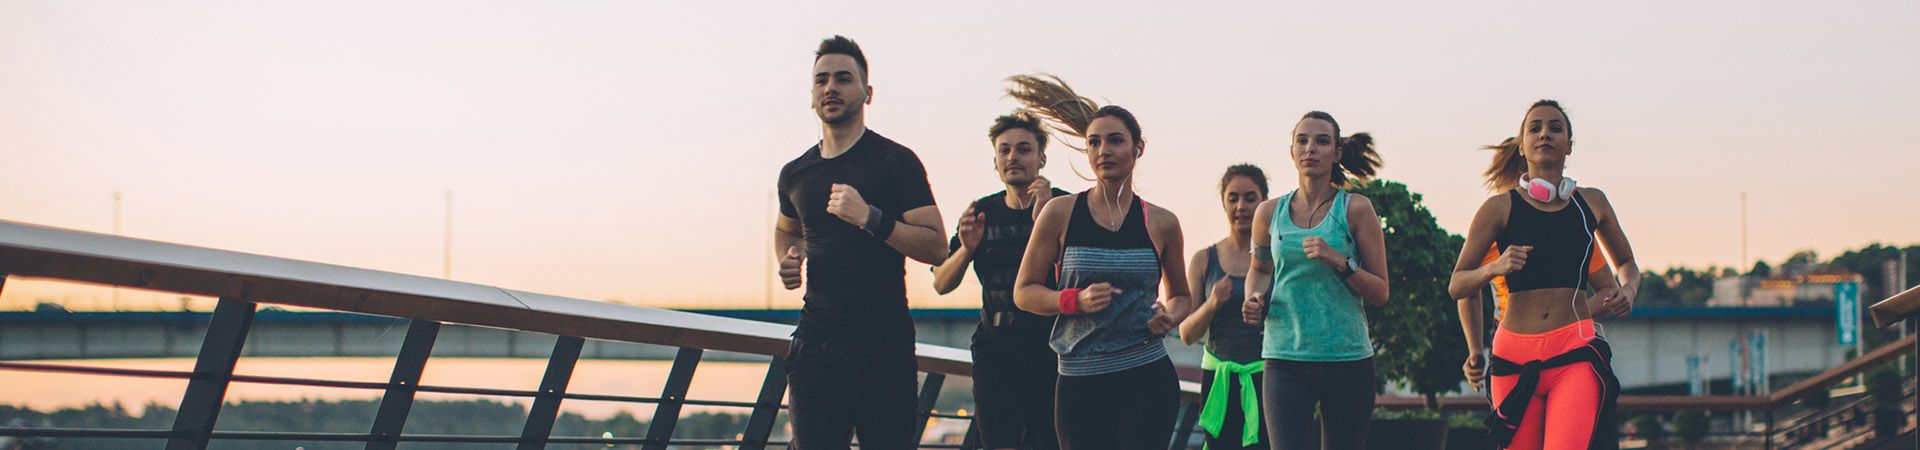 Running plan for beginners: a group of runners jogging together.